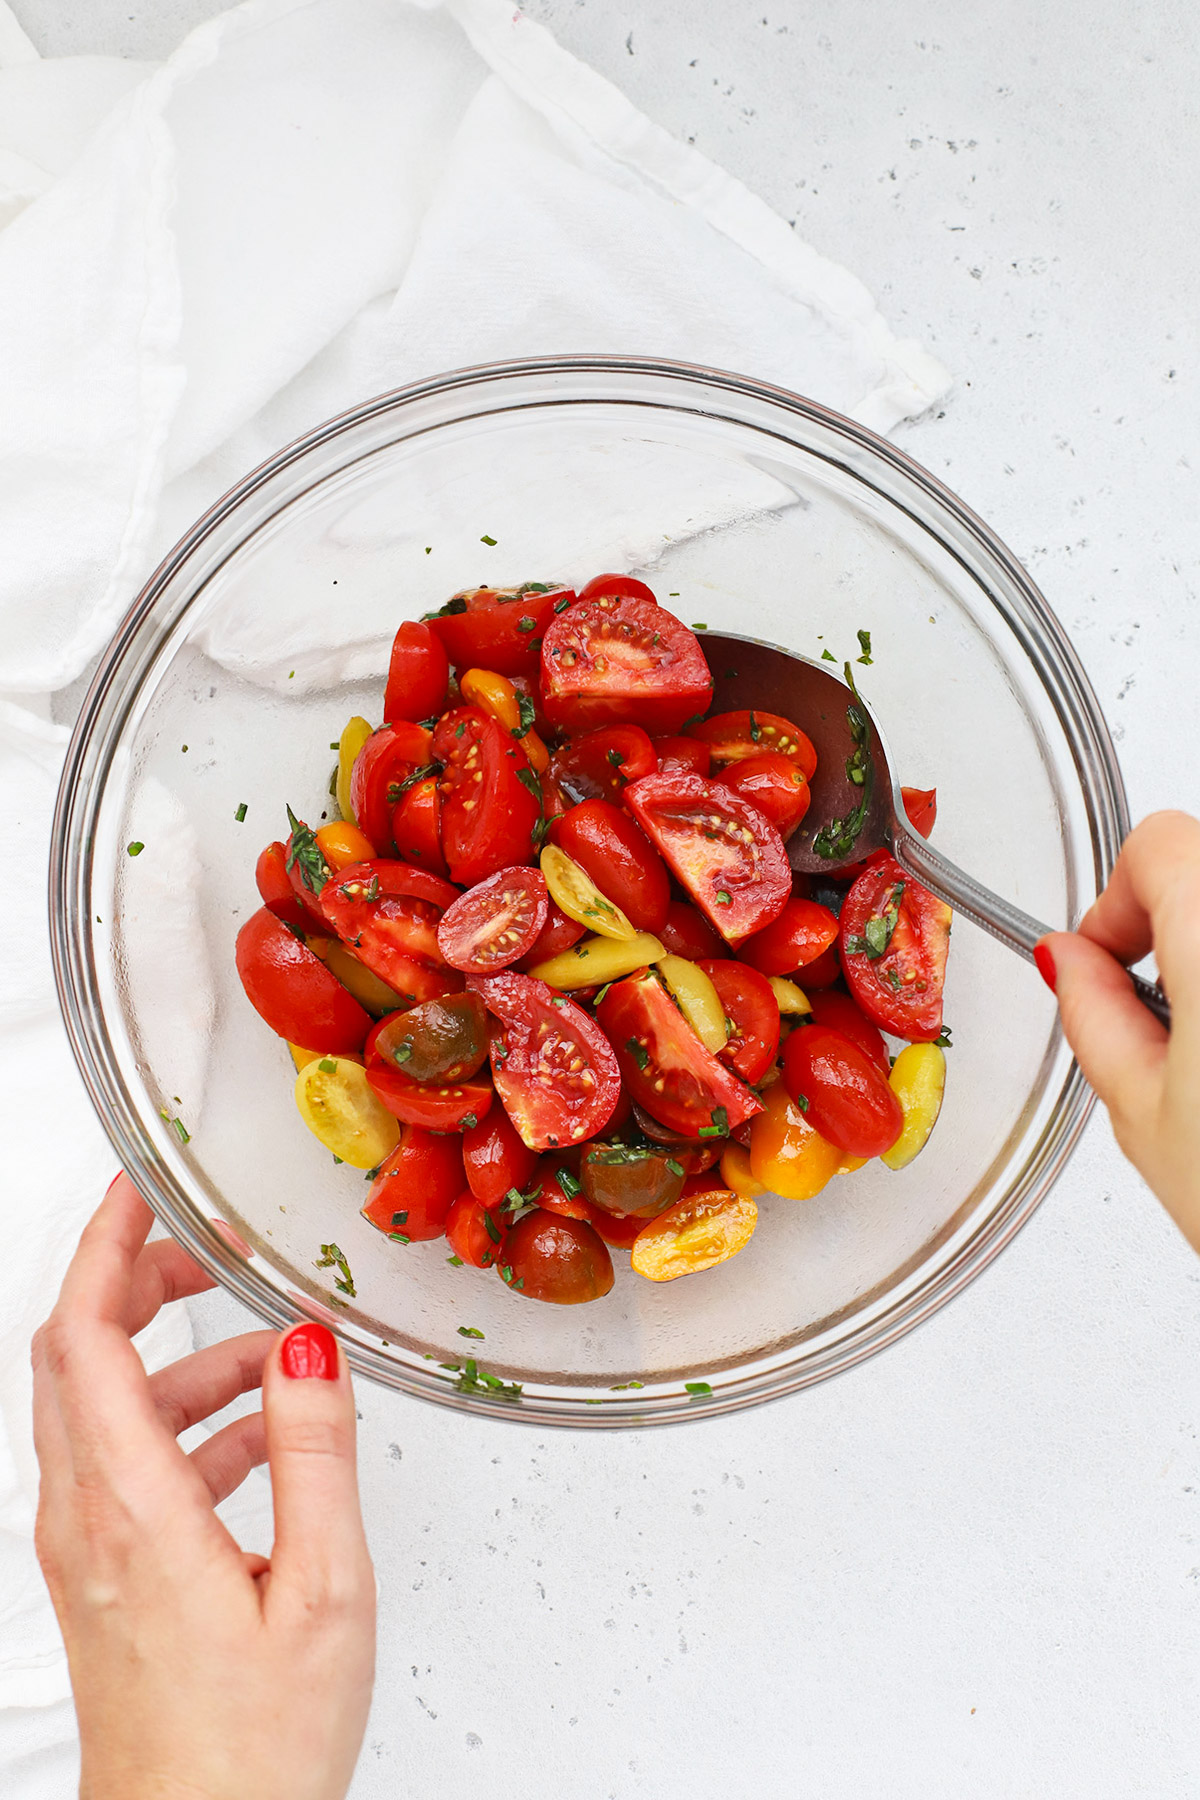 Overhead view of balsamic marinated tomatoes with fresh herbs